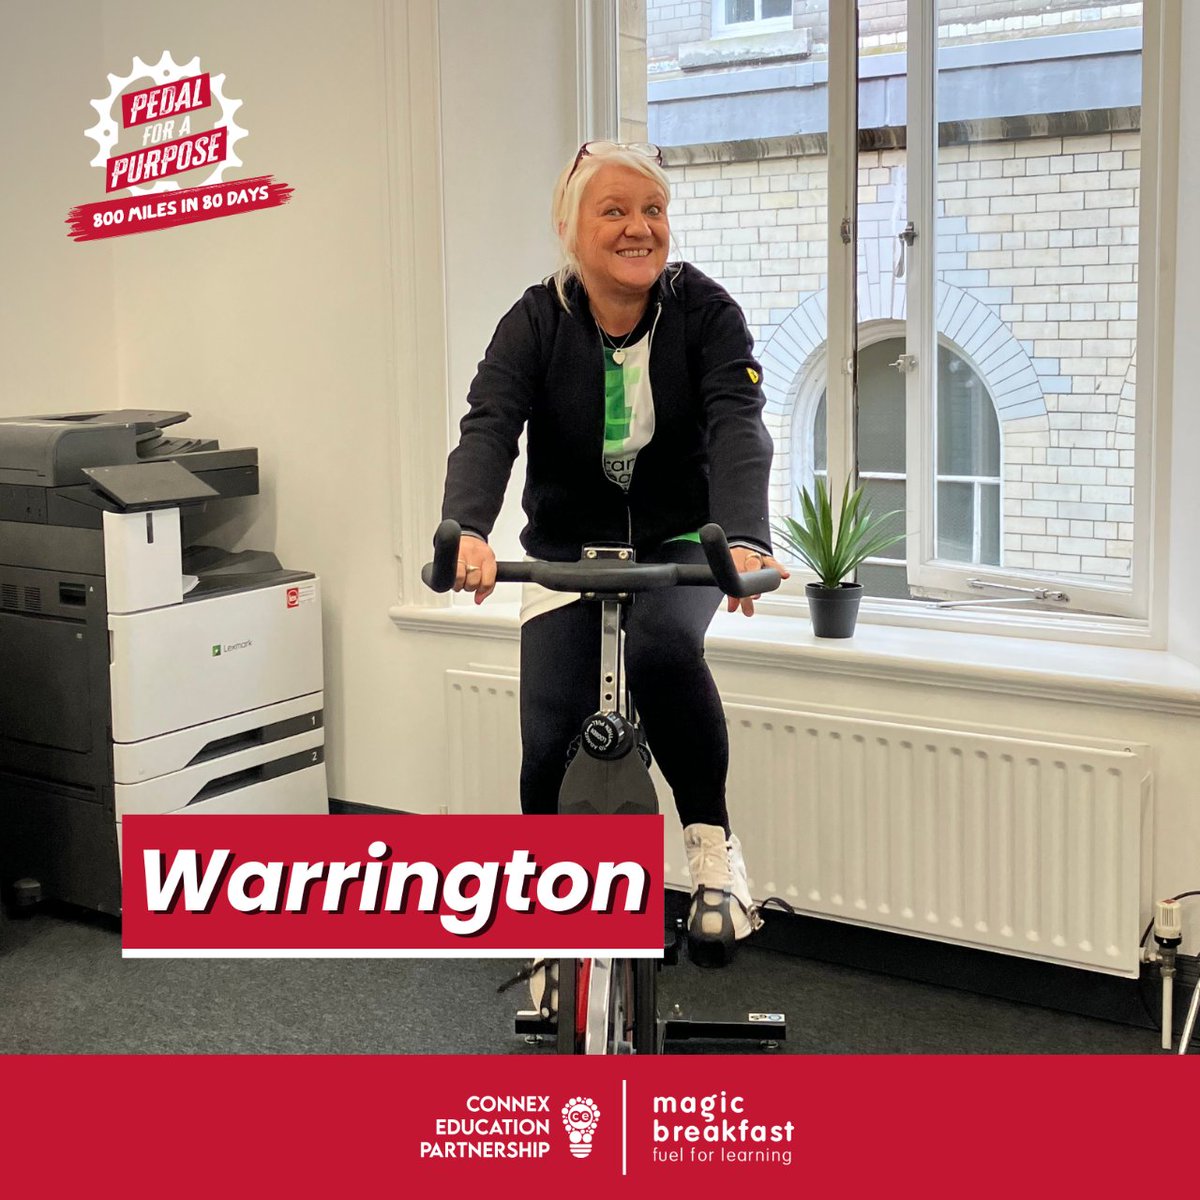 #Warrington you were wonderful 🚴‍♀️👏

#PedalForAPurpose is nearly at the finish line, but there is still time to donate then please do at 👉lnkd.in/eKc3gJXM

#NoChildTooHungryToLearn #1MillionBreakfast #OfficeFun